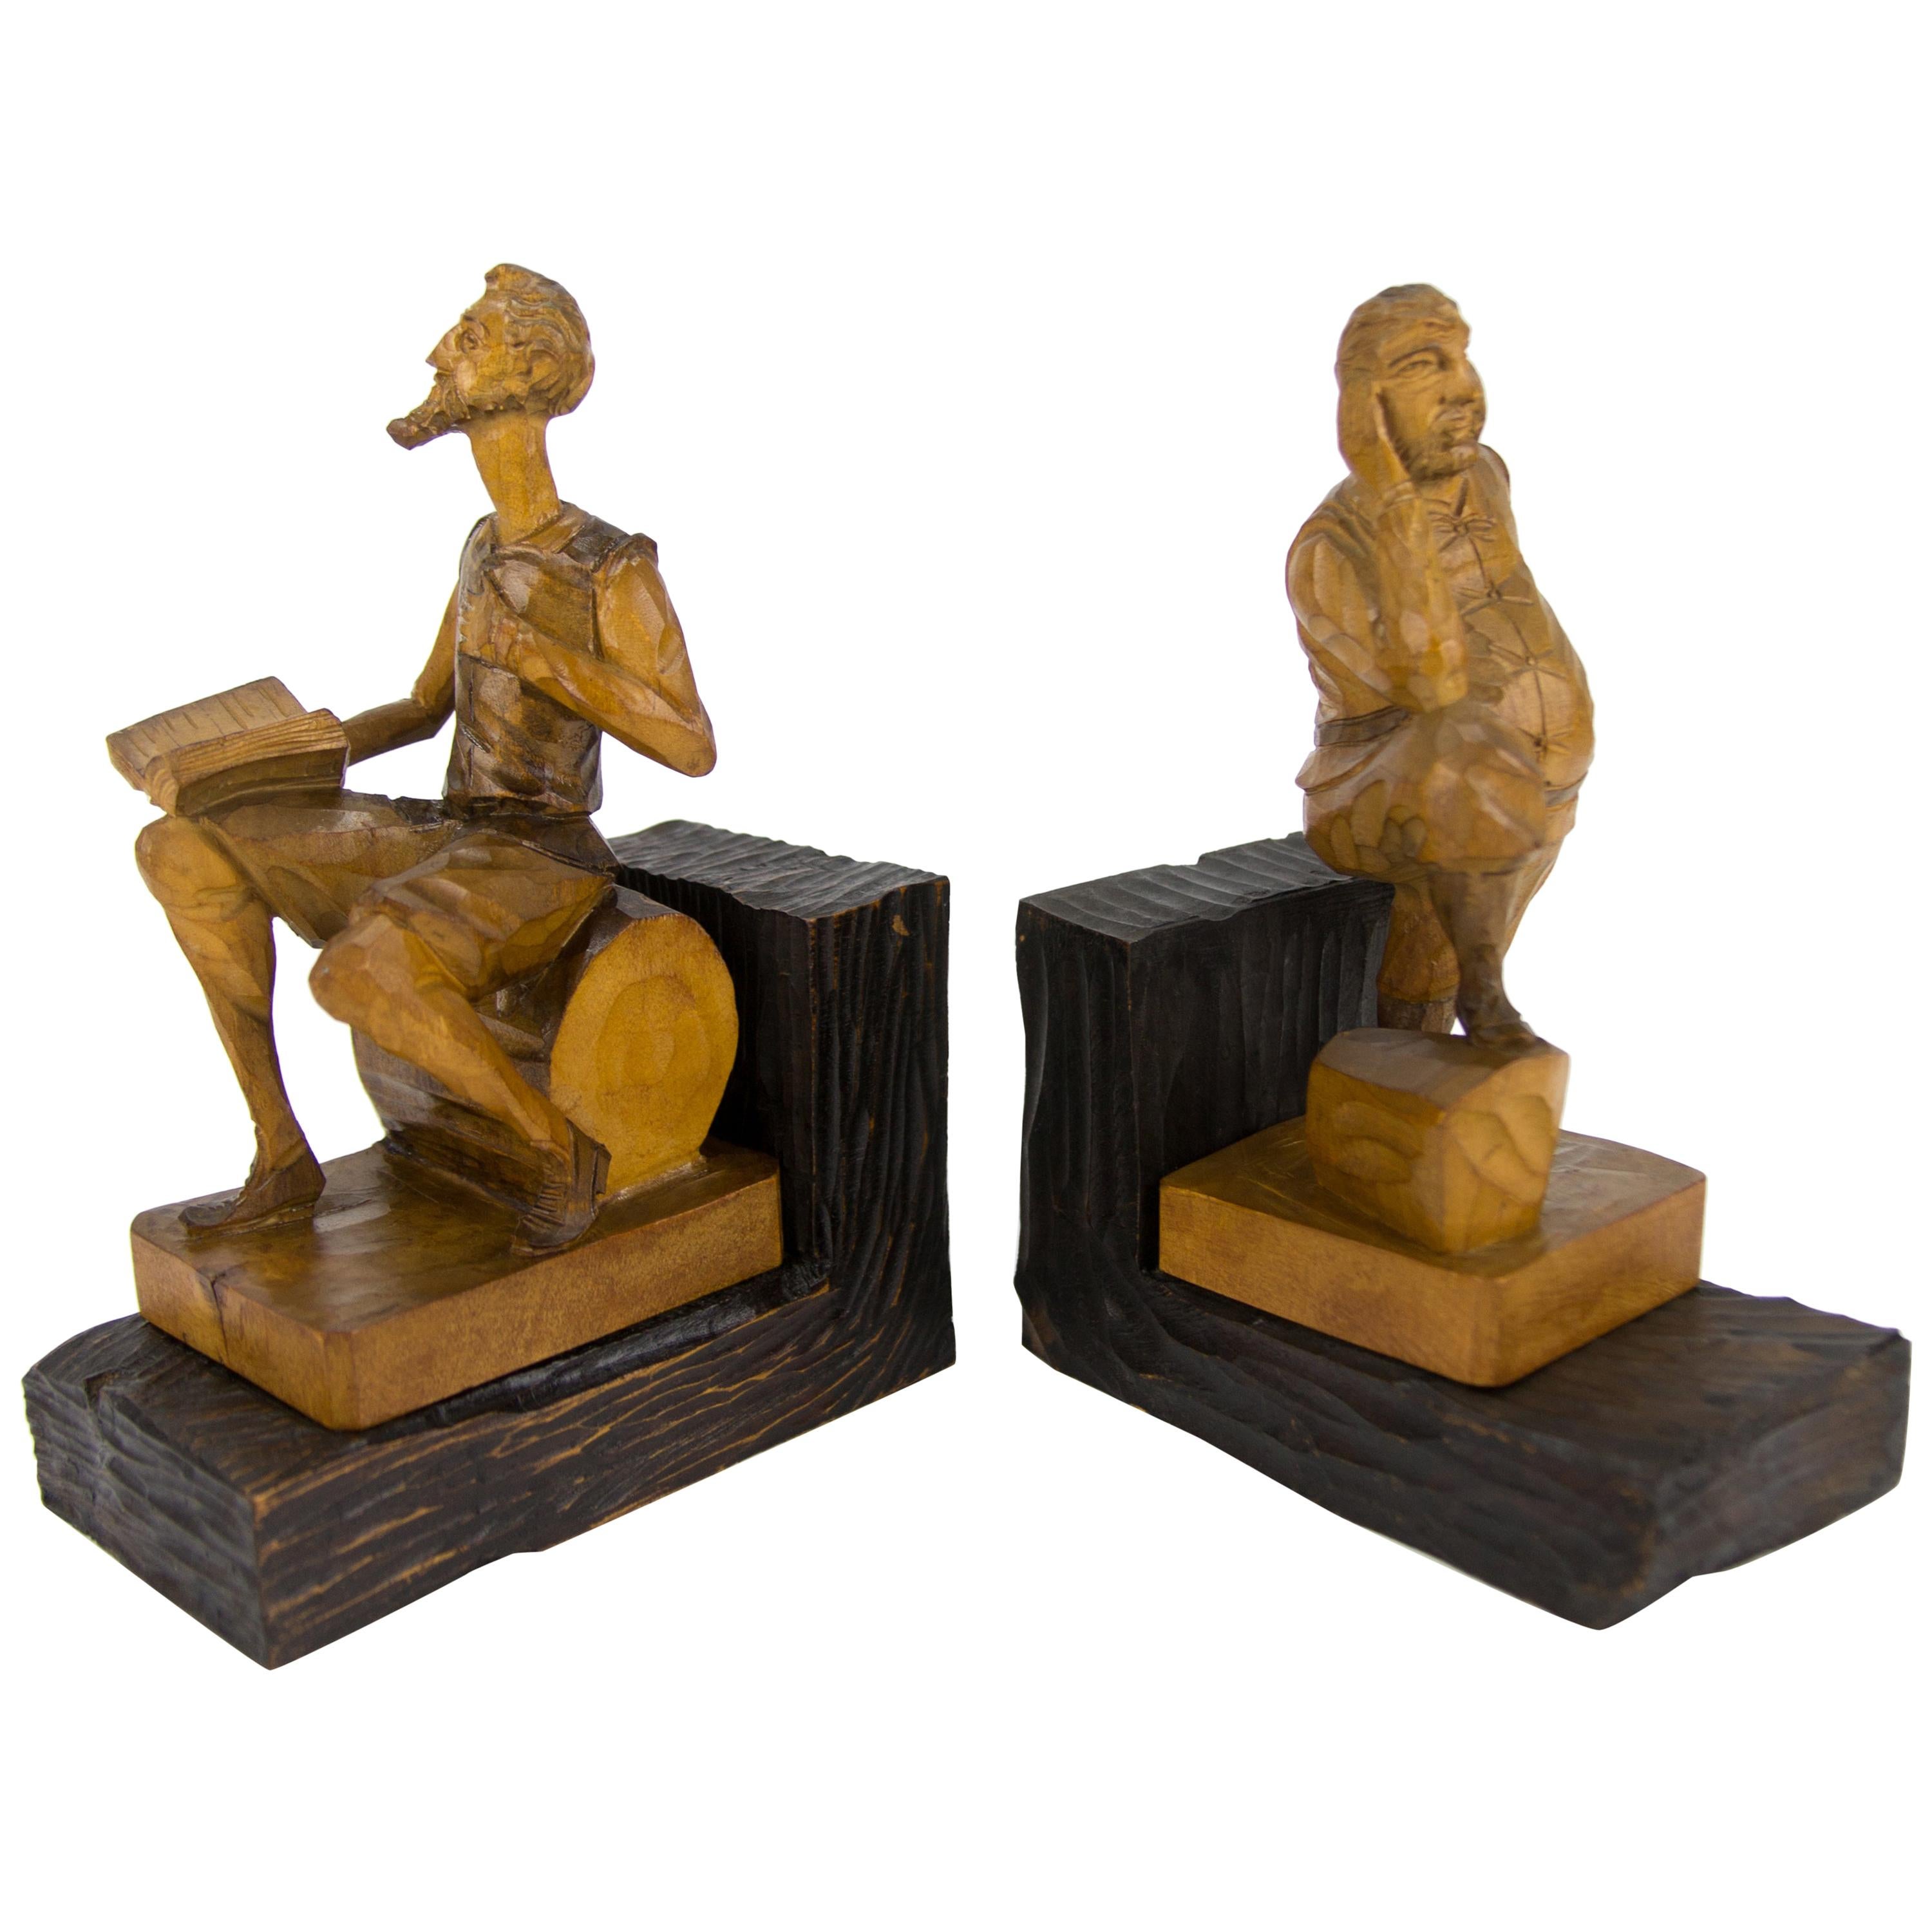 Hand Carved Wooden Don Quixote and Sancho Panza Sculpture Bookends